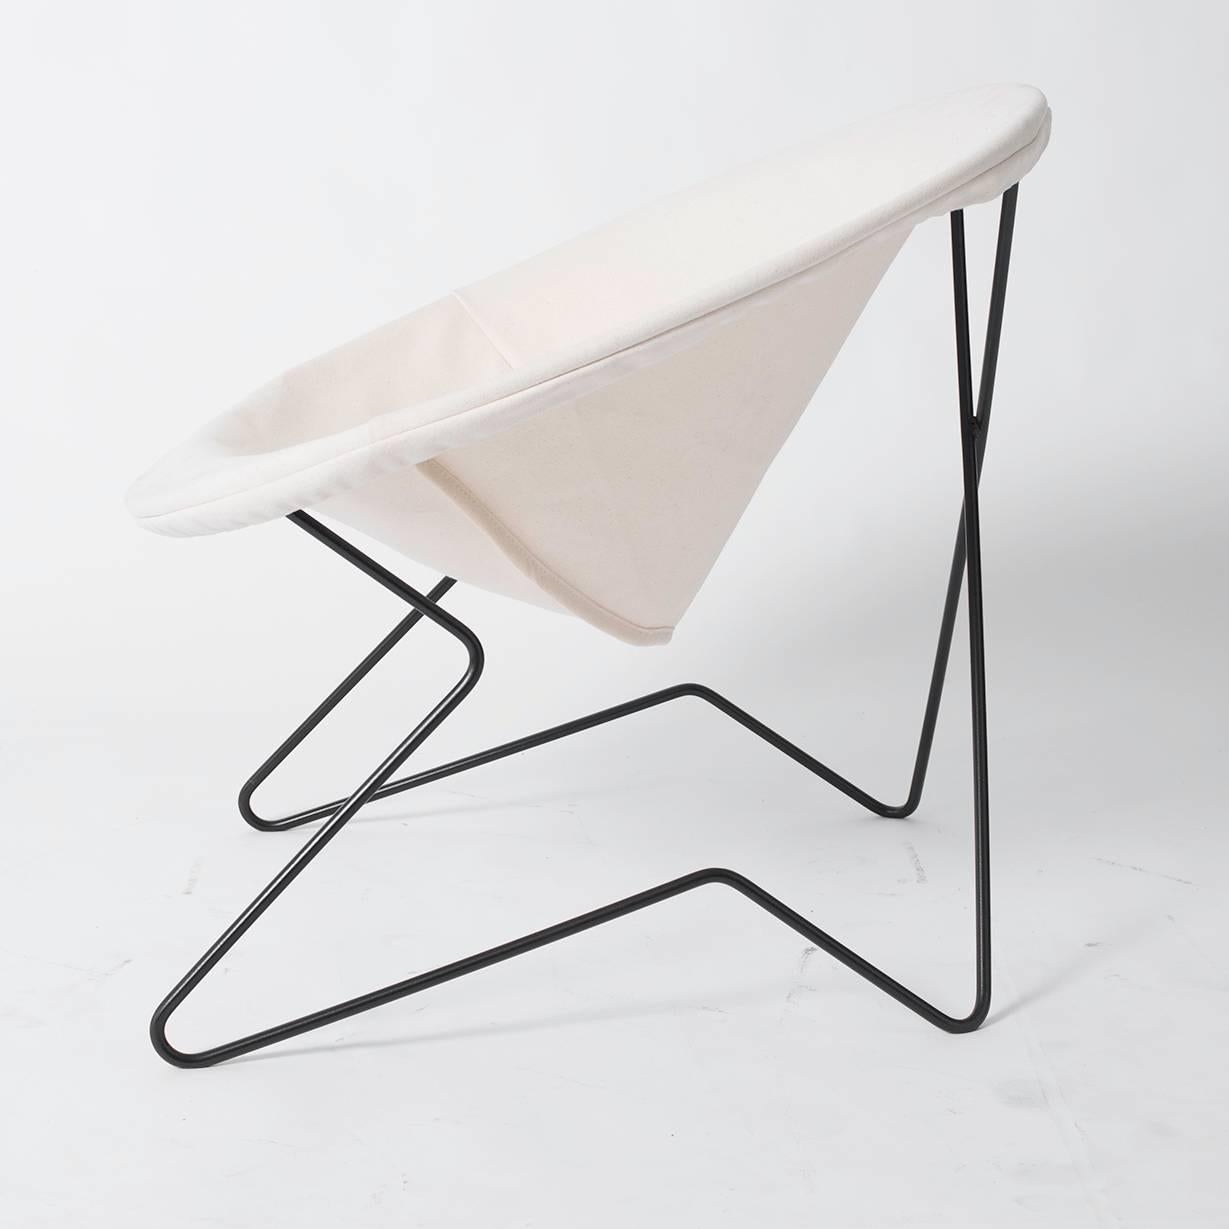 Powder-Coated Single Cantilevered Modernist Hoop Chair with Canvas Cover